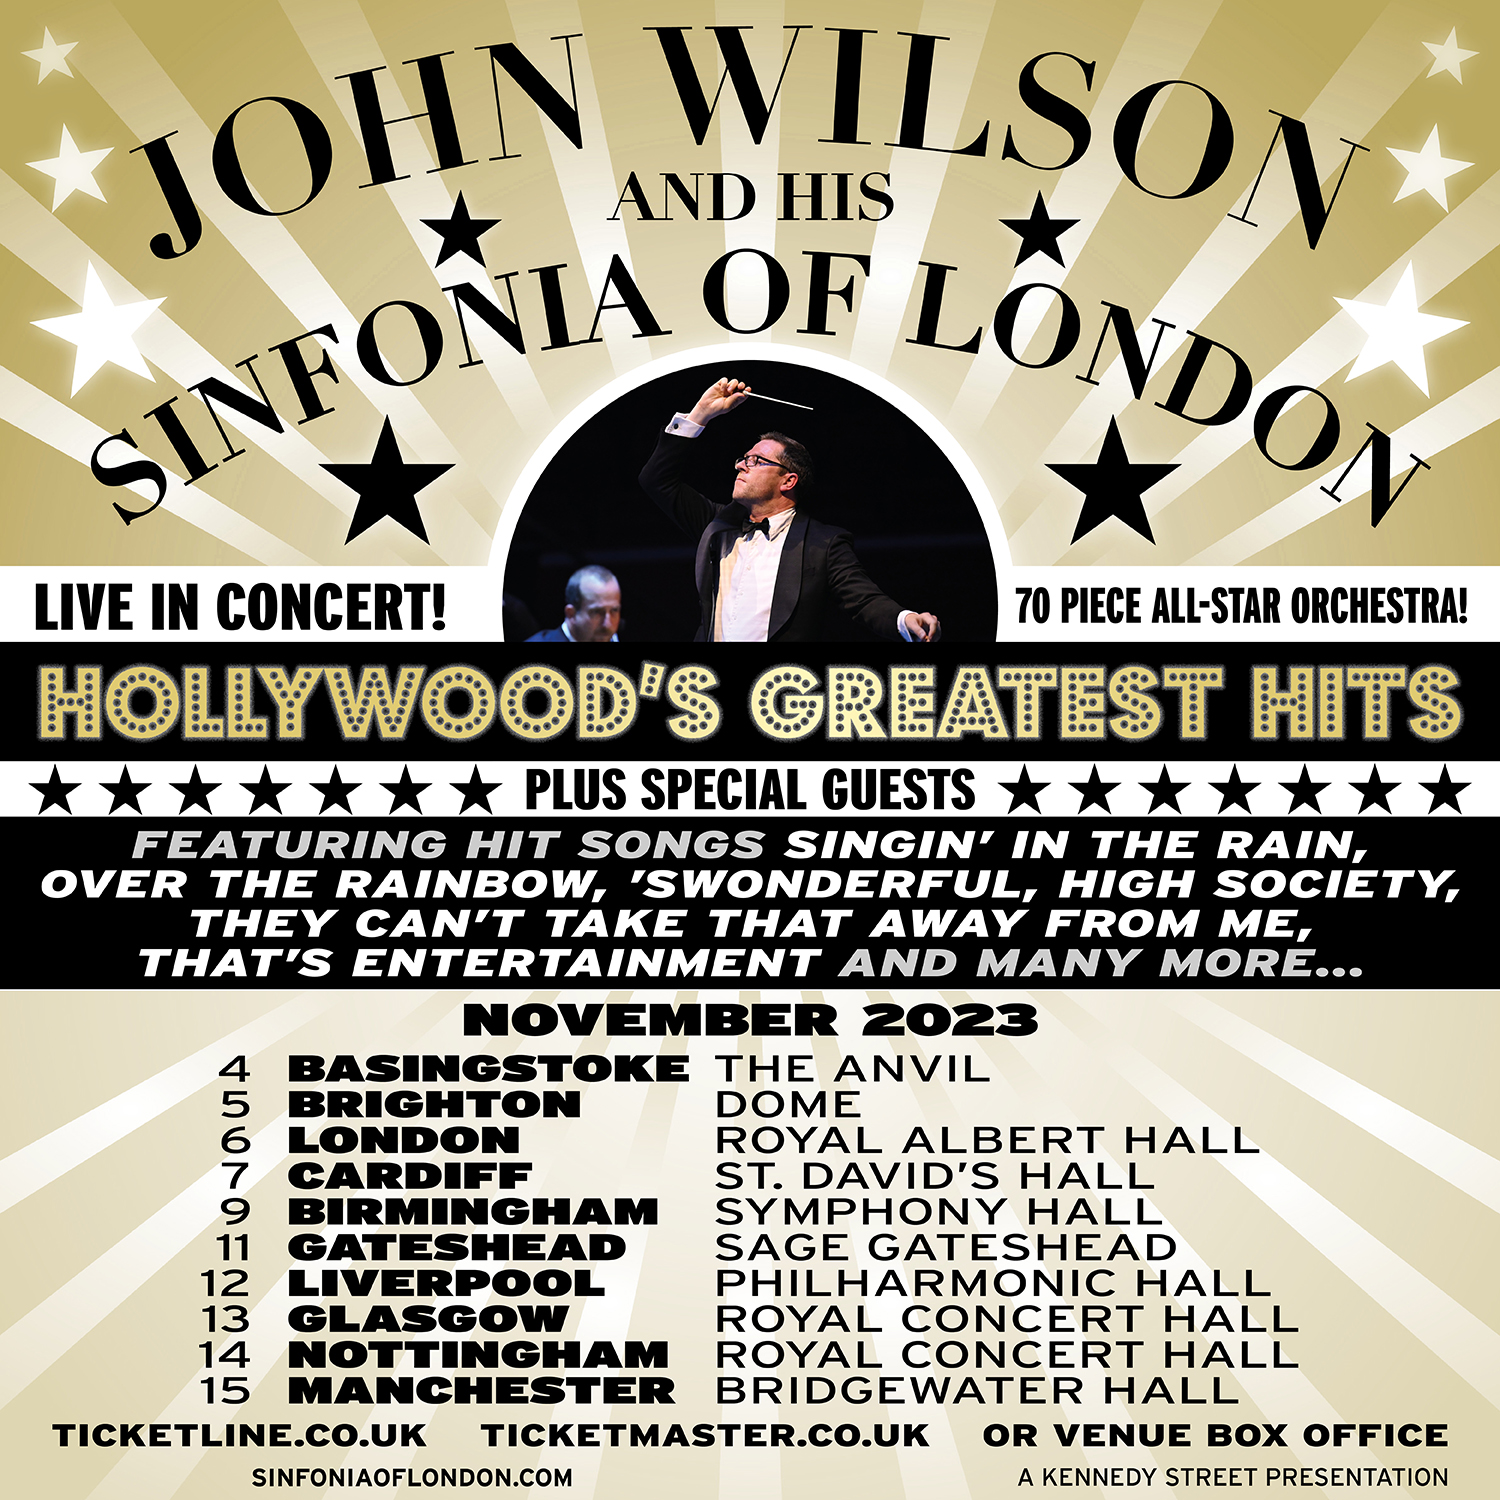 Hollywood's Greatest Hits - 2023 Tour Announced - Sinfonia of London